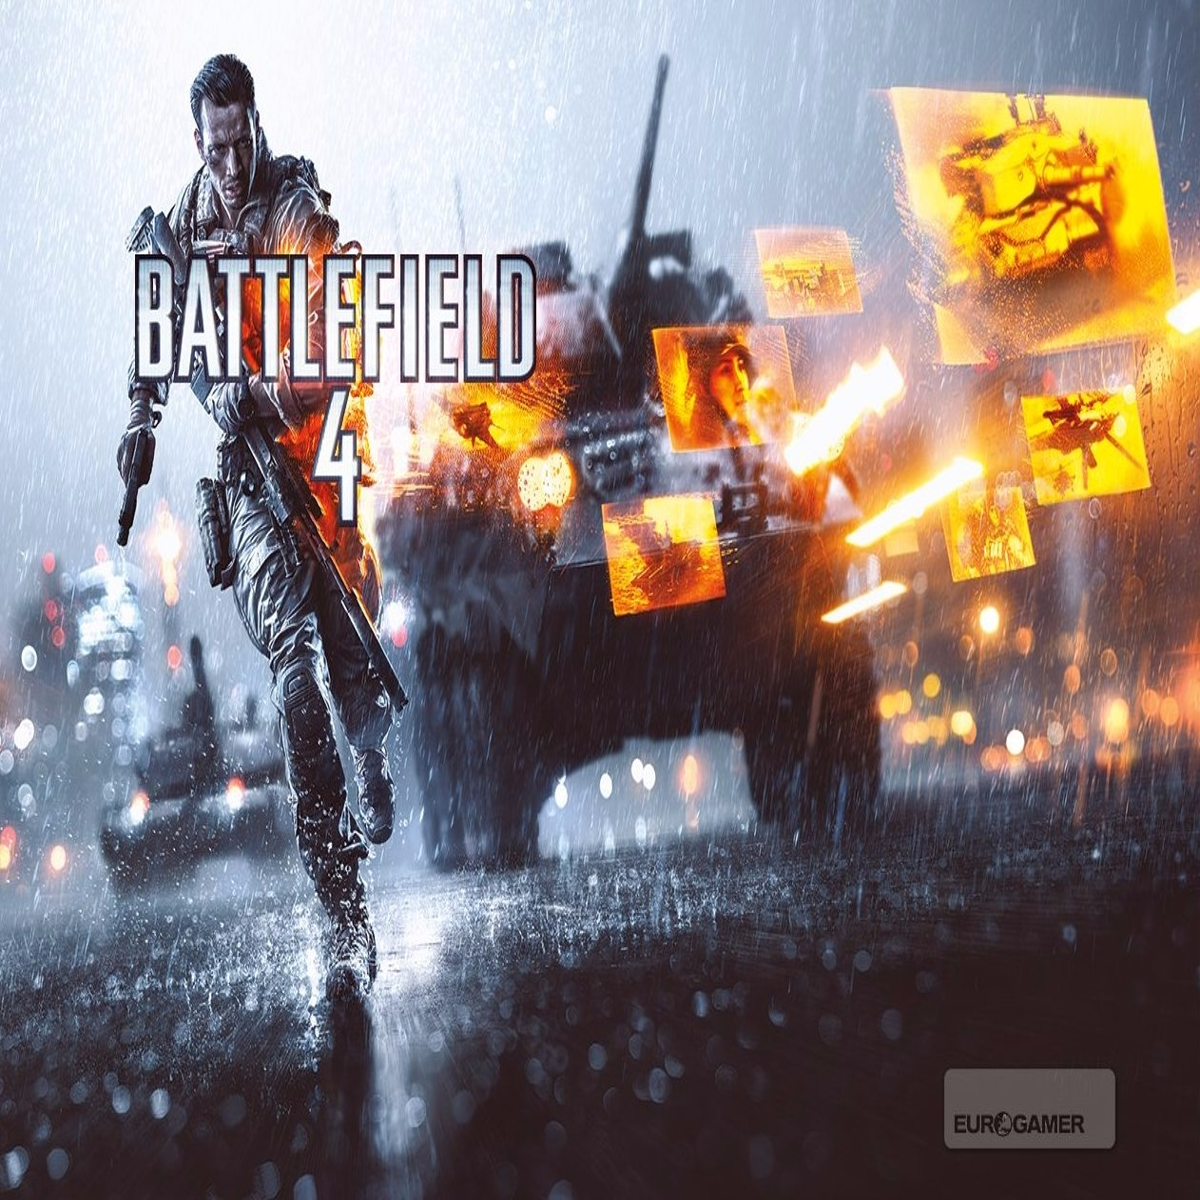 Battlefield 4 server capacity increased to deal with players hyped for  Battlefield 2042